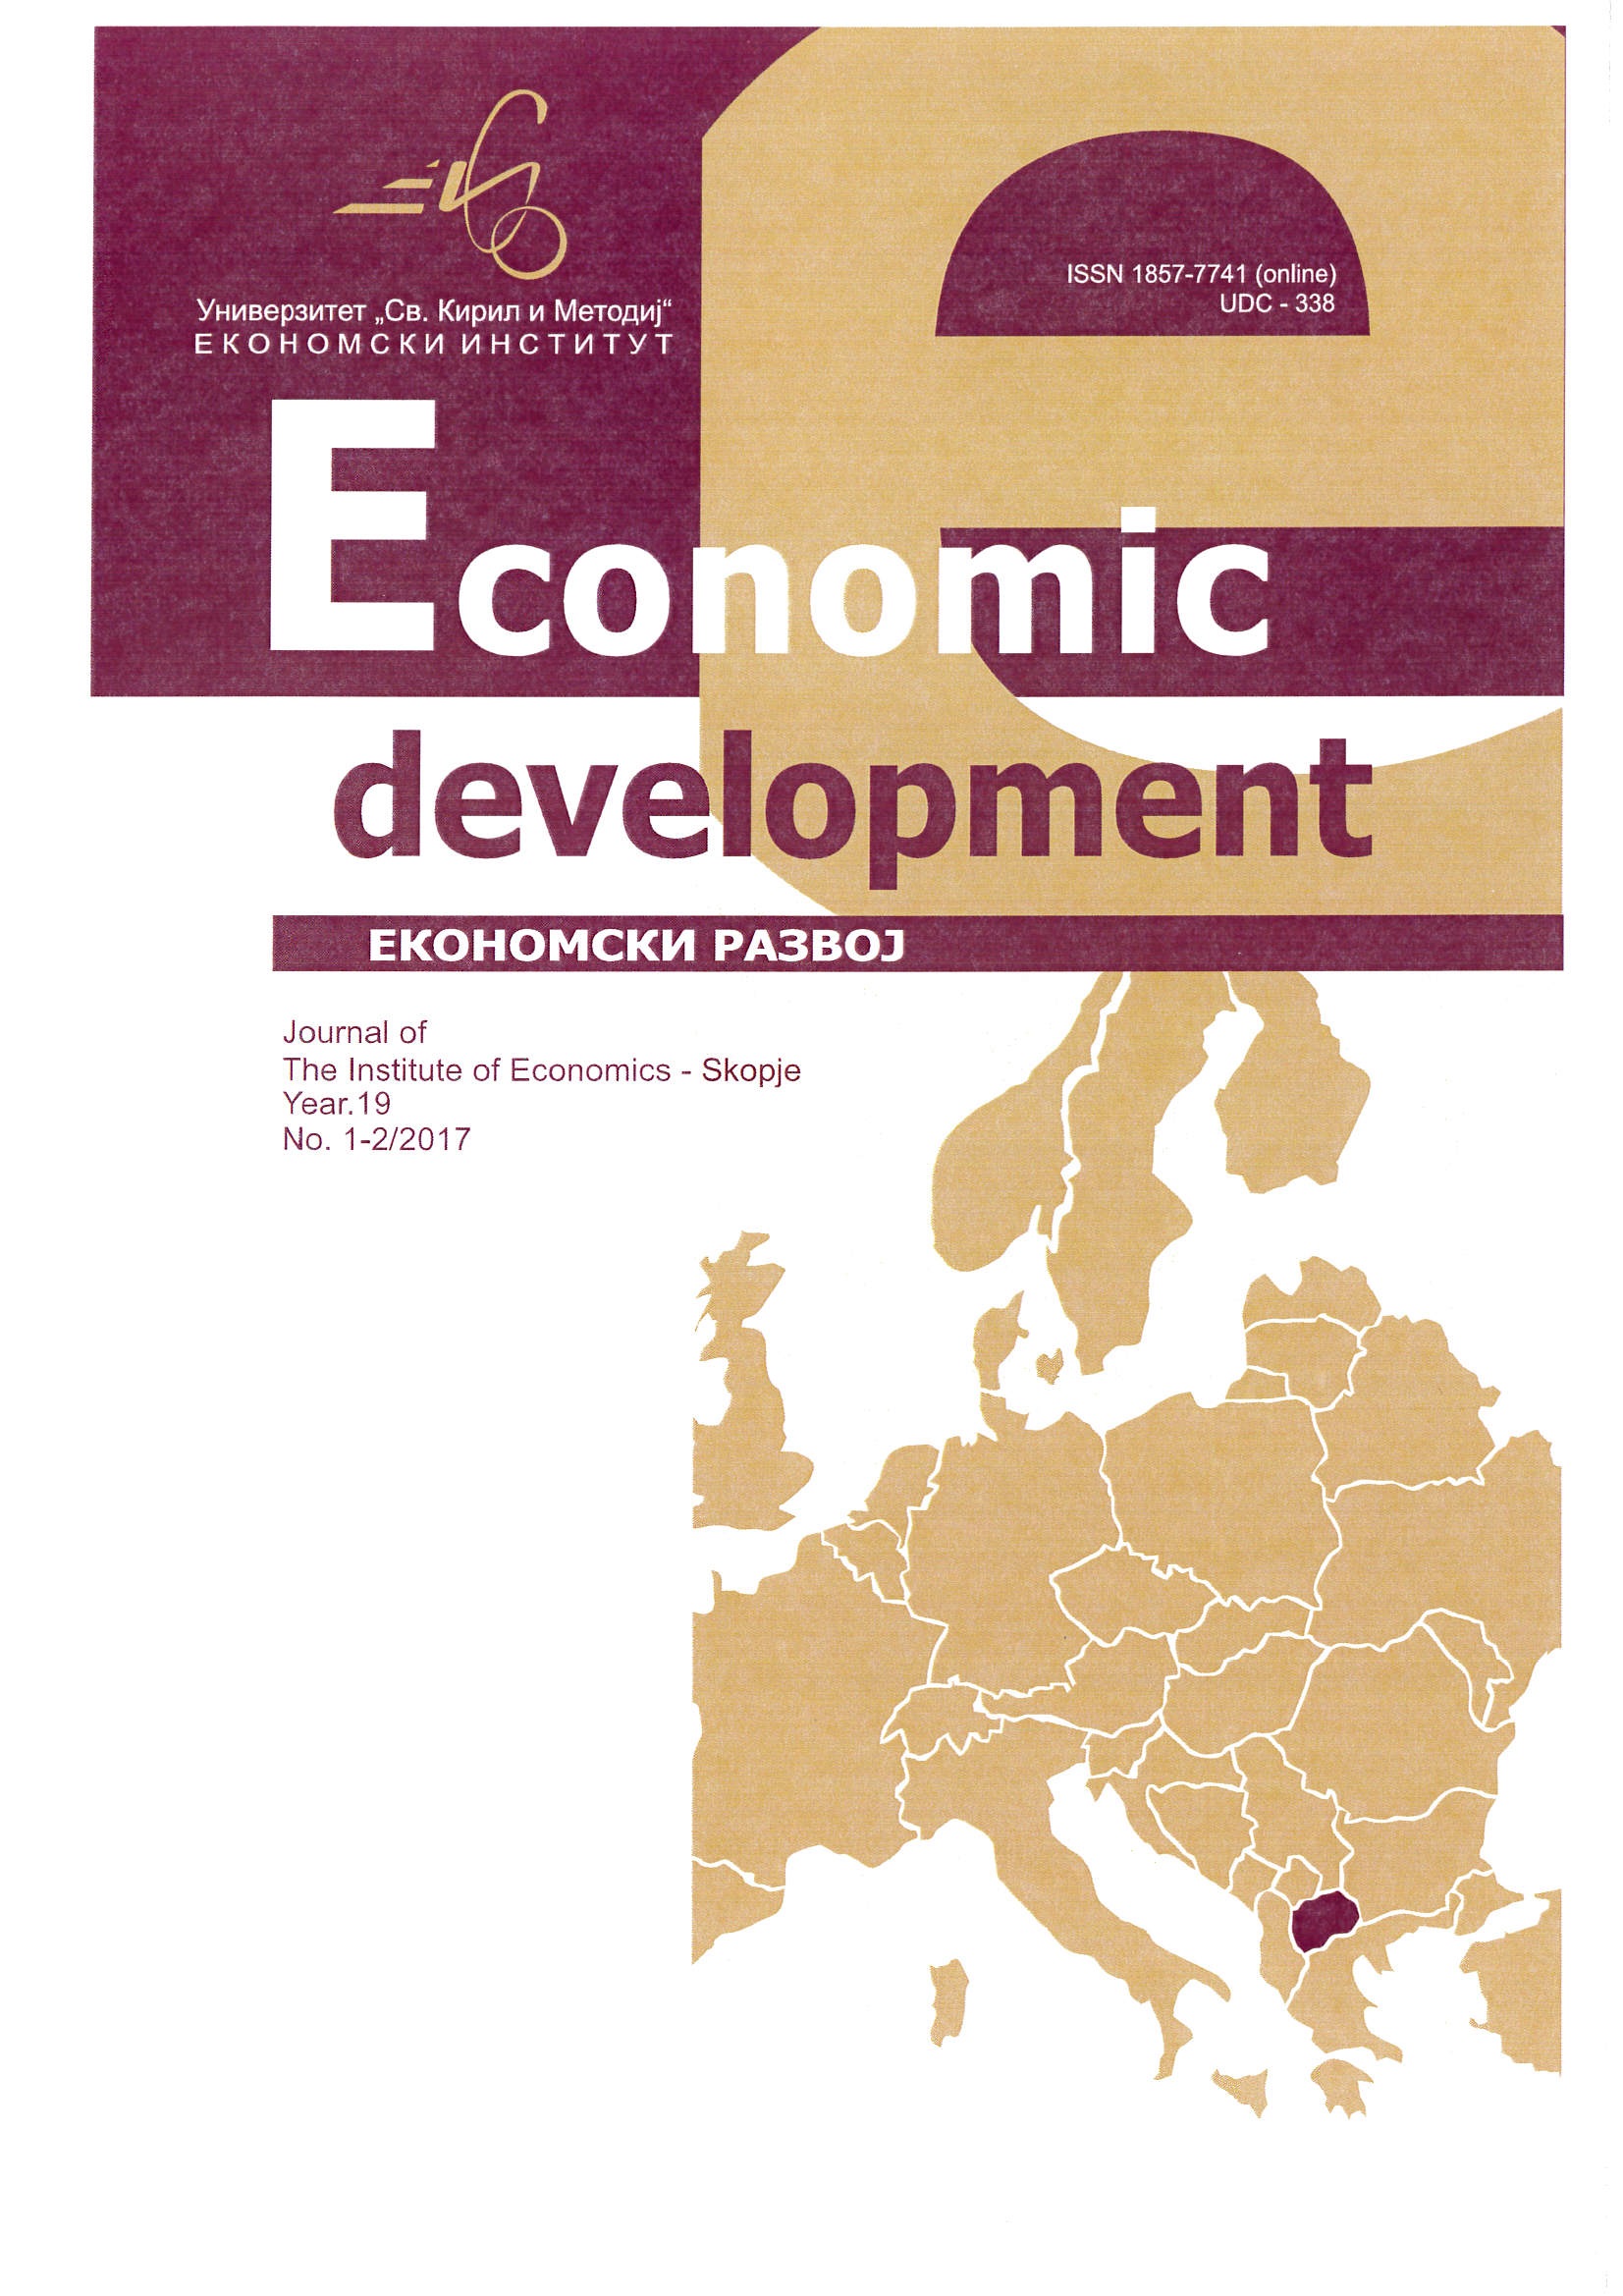 Implications of budget deficit on economic growth  - case study of the Republic of Macedonia